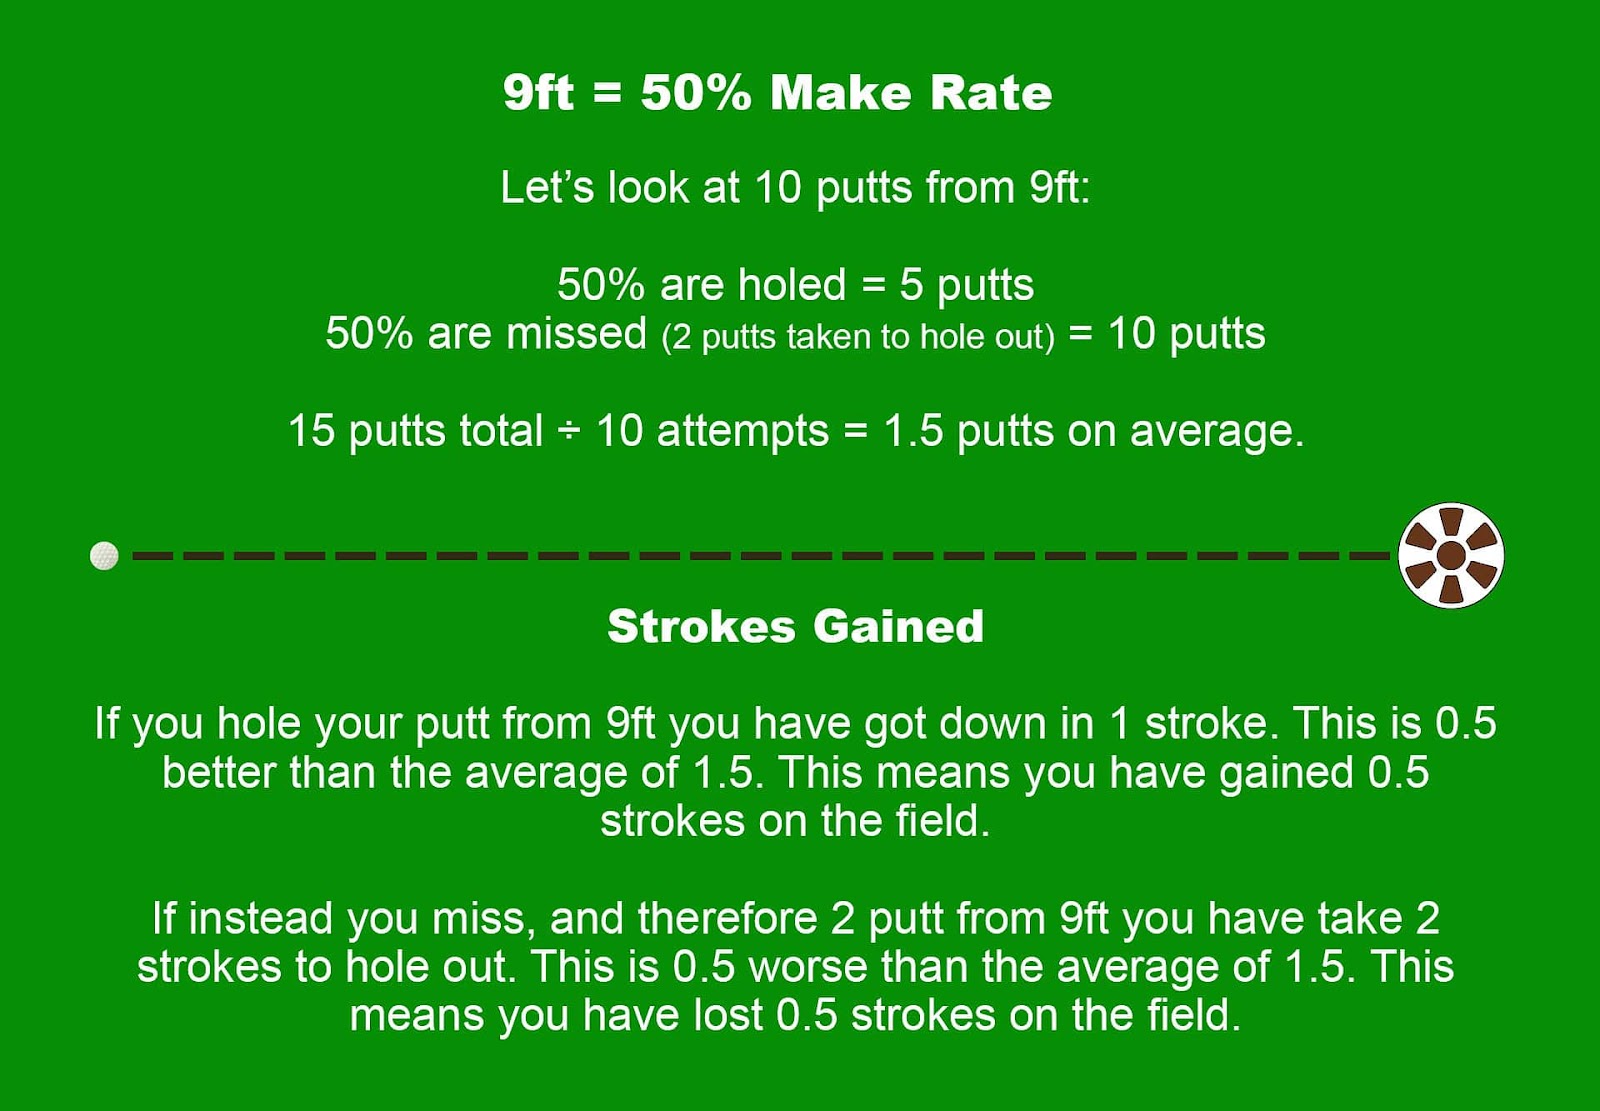 strokes gained